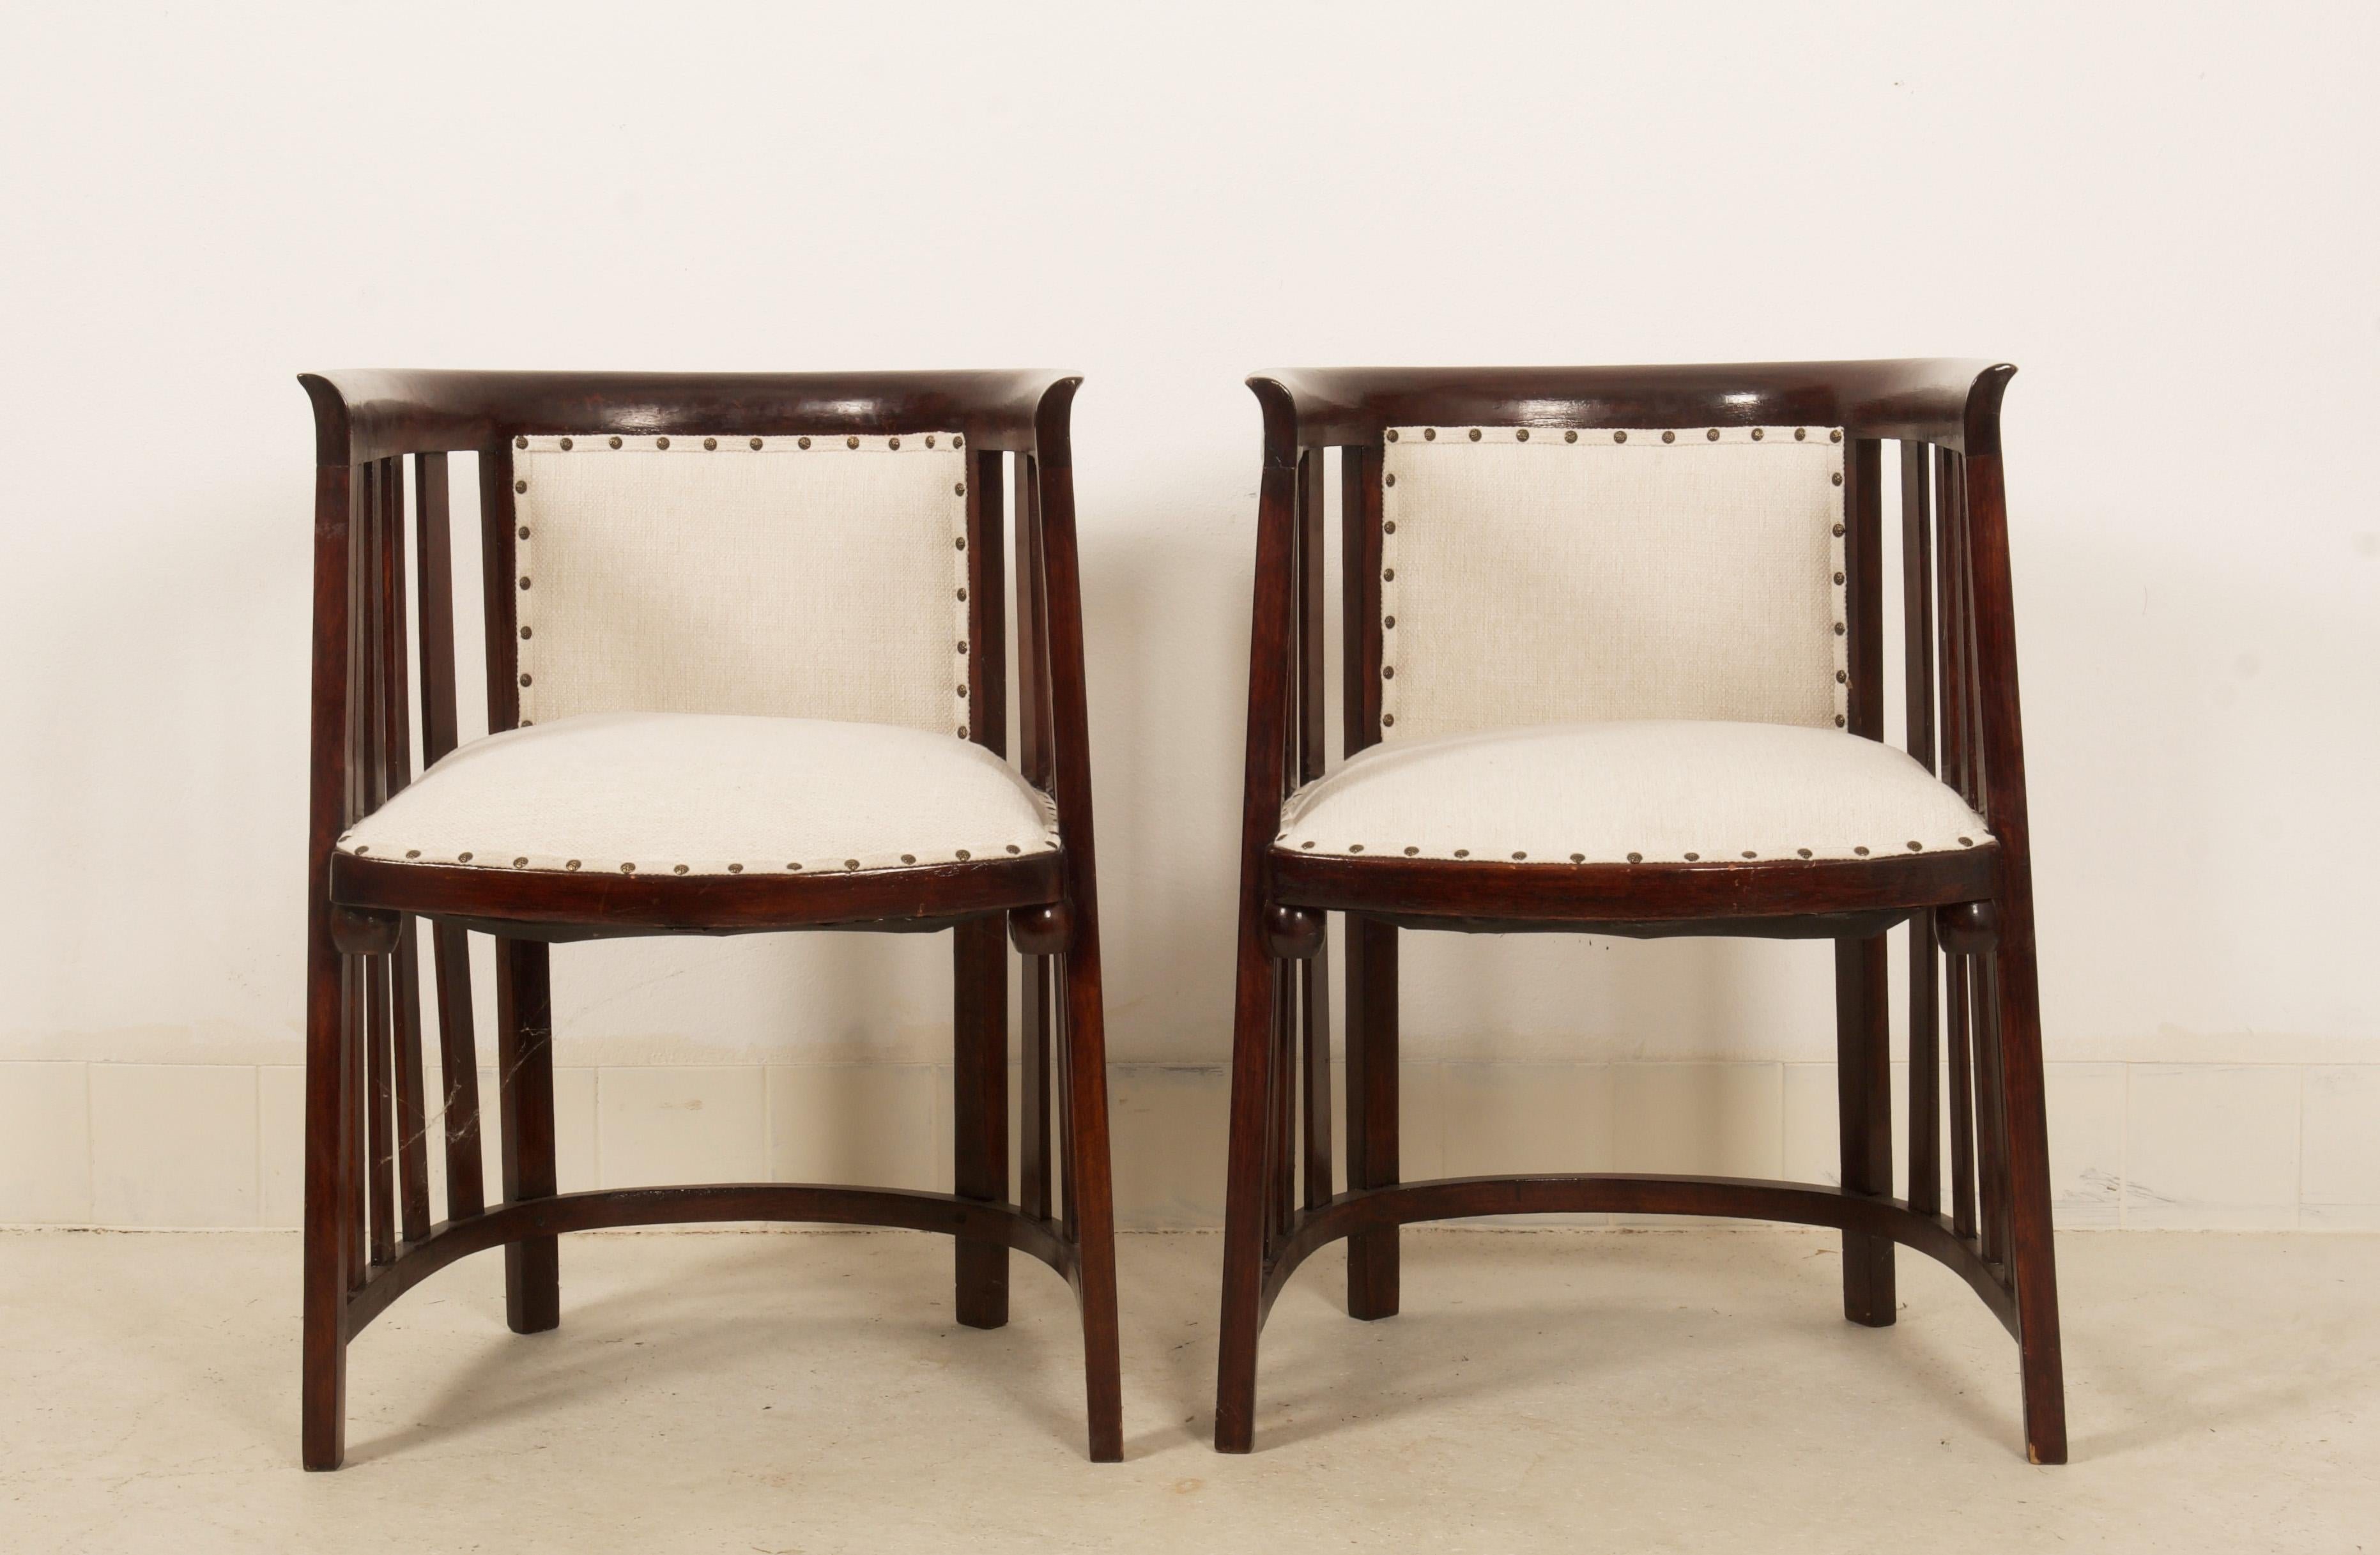 Beech bentwood frame, wool fabric upholstery. Designed circa 1900-1910 by Josef Hoffmann for Cabaret Fledermaus in Vienna. Made by Thonet.
Set of two.